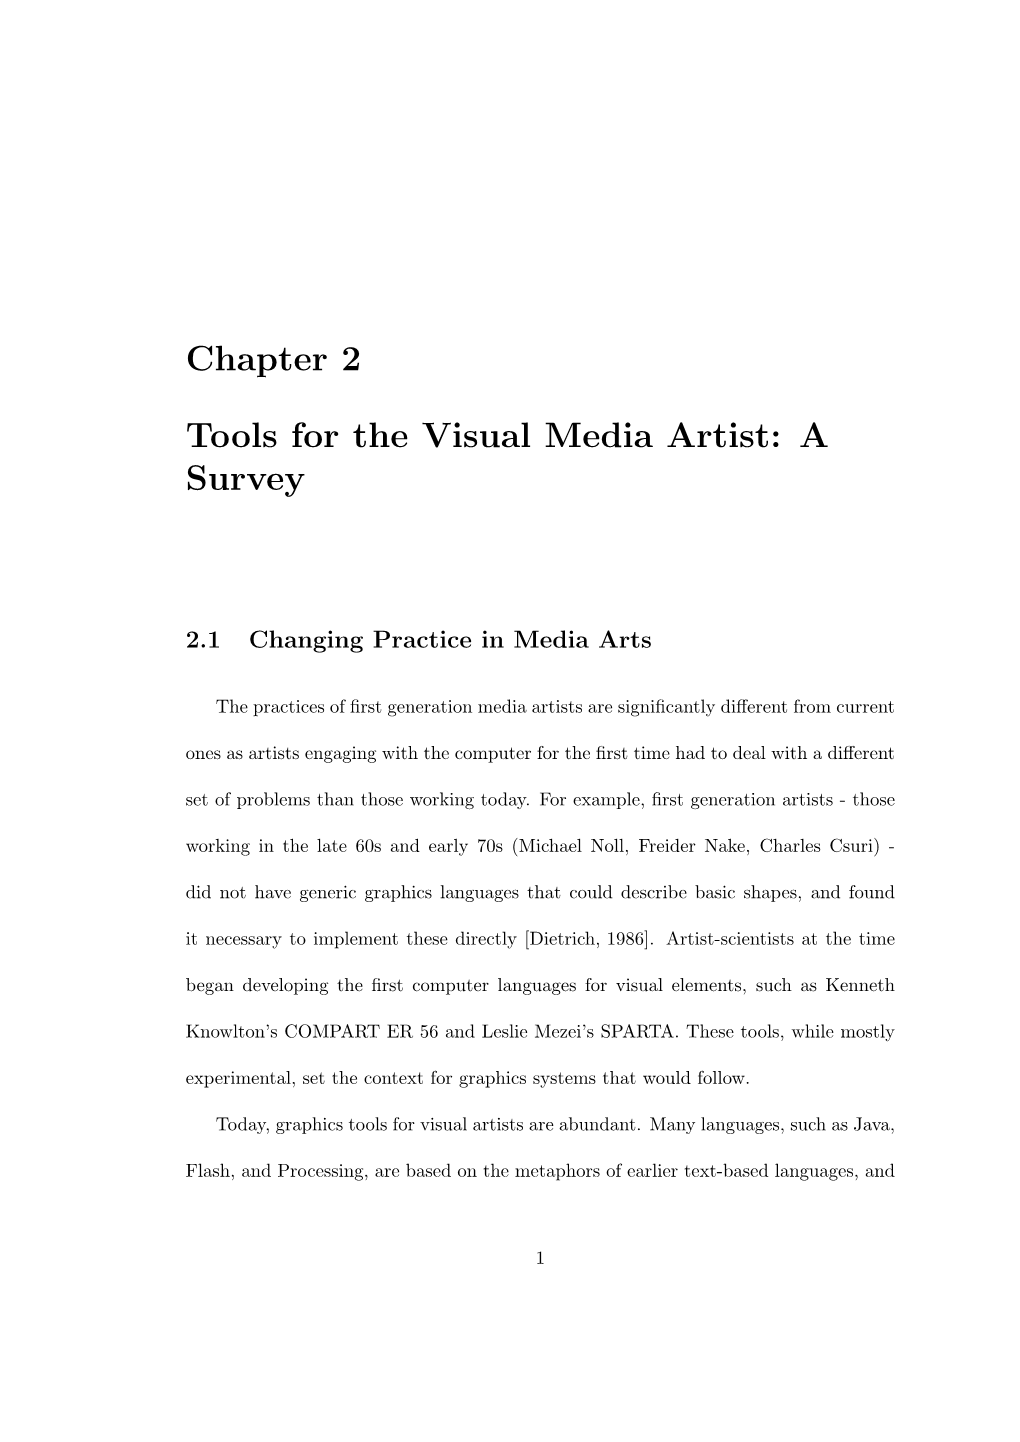 Chapter 2 Tools for the Visual Media Artist: a Survey